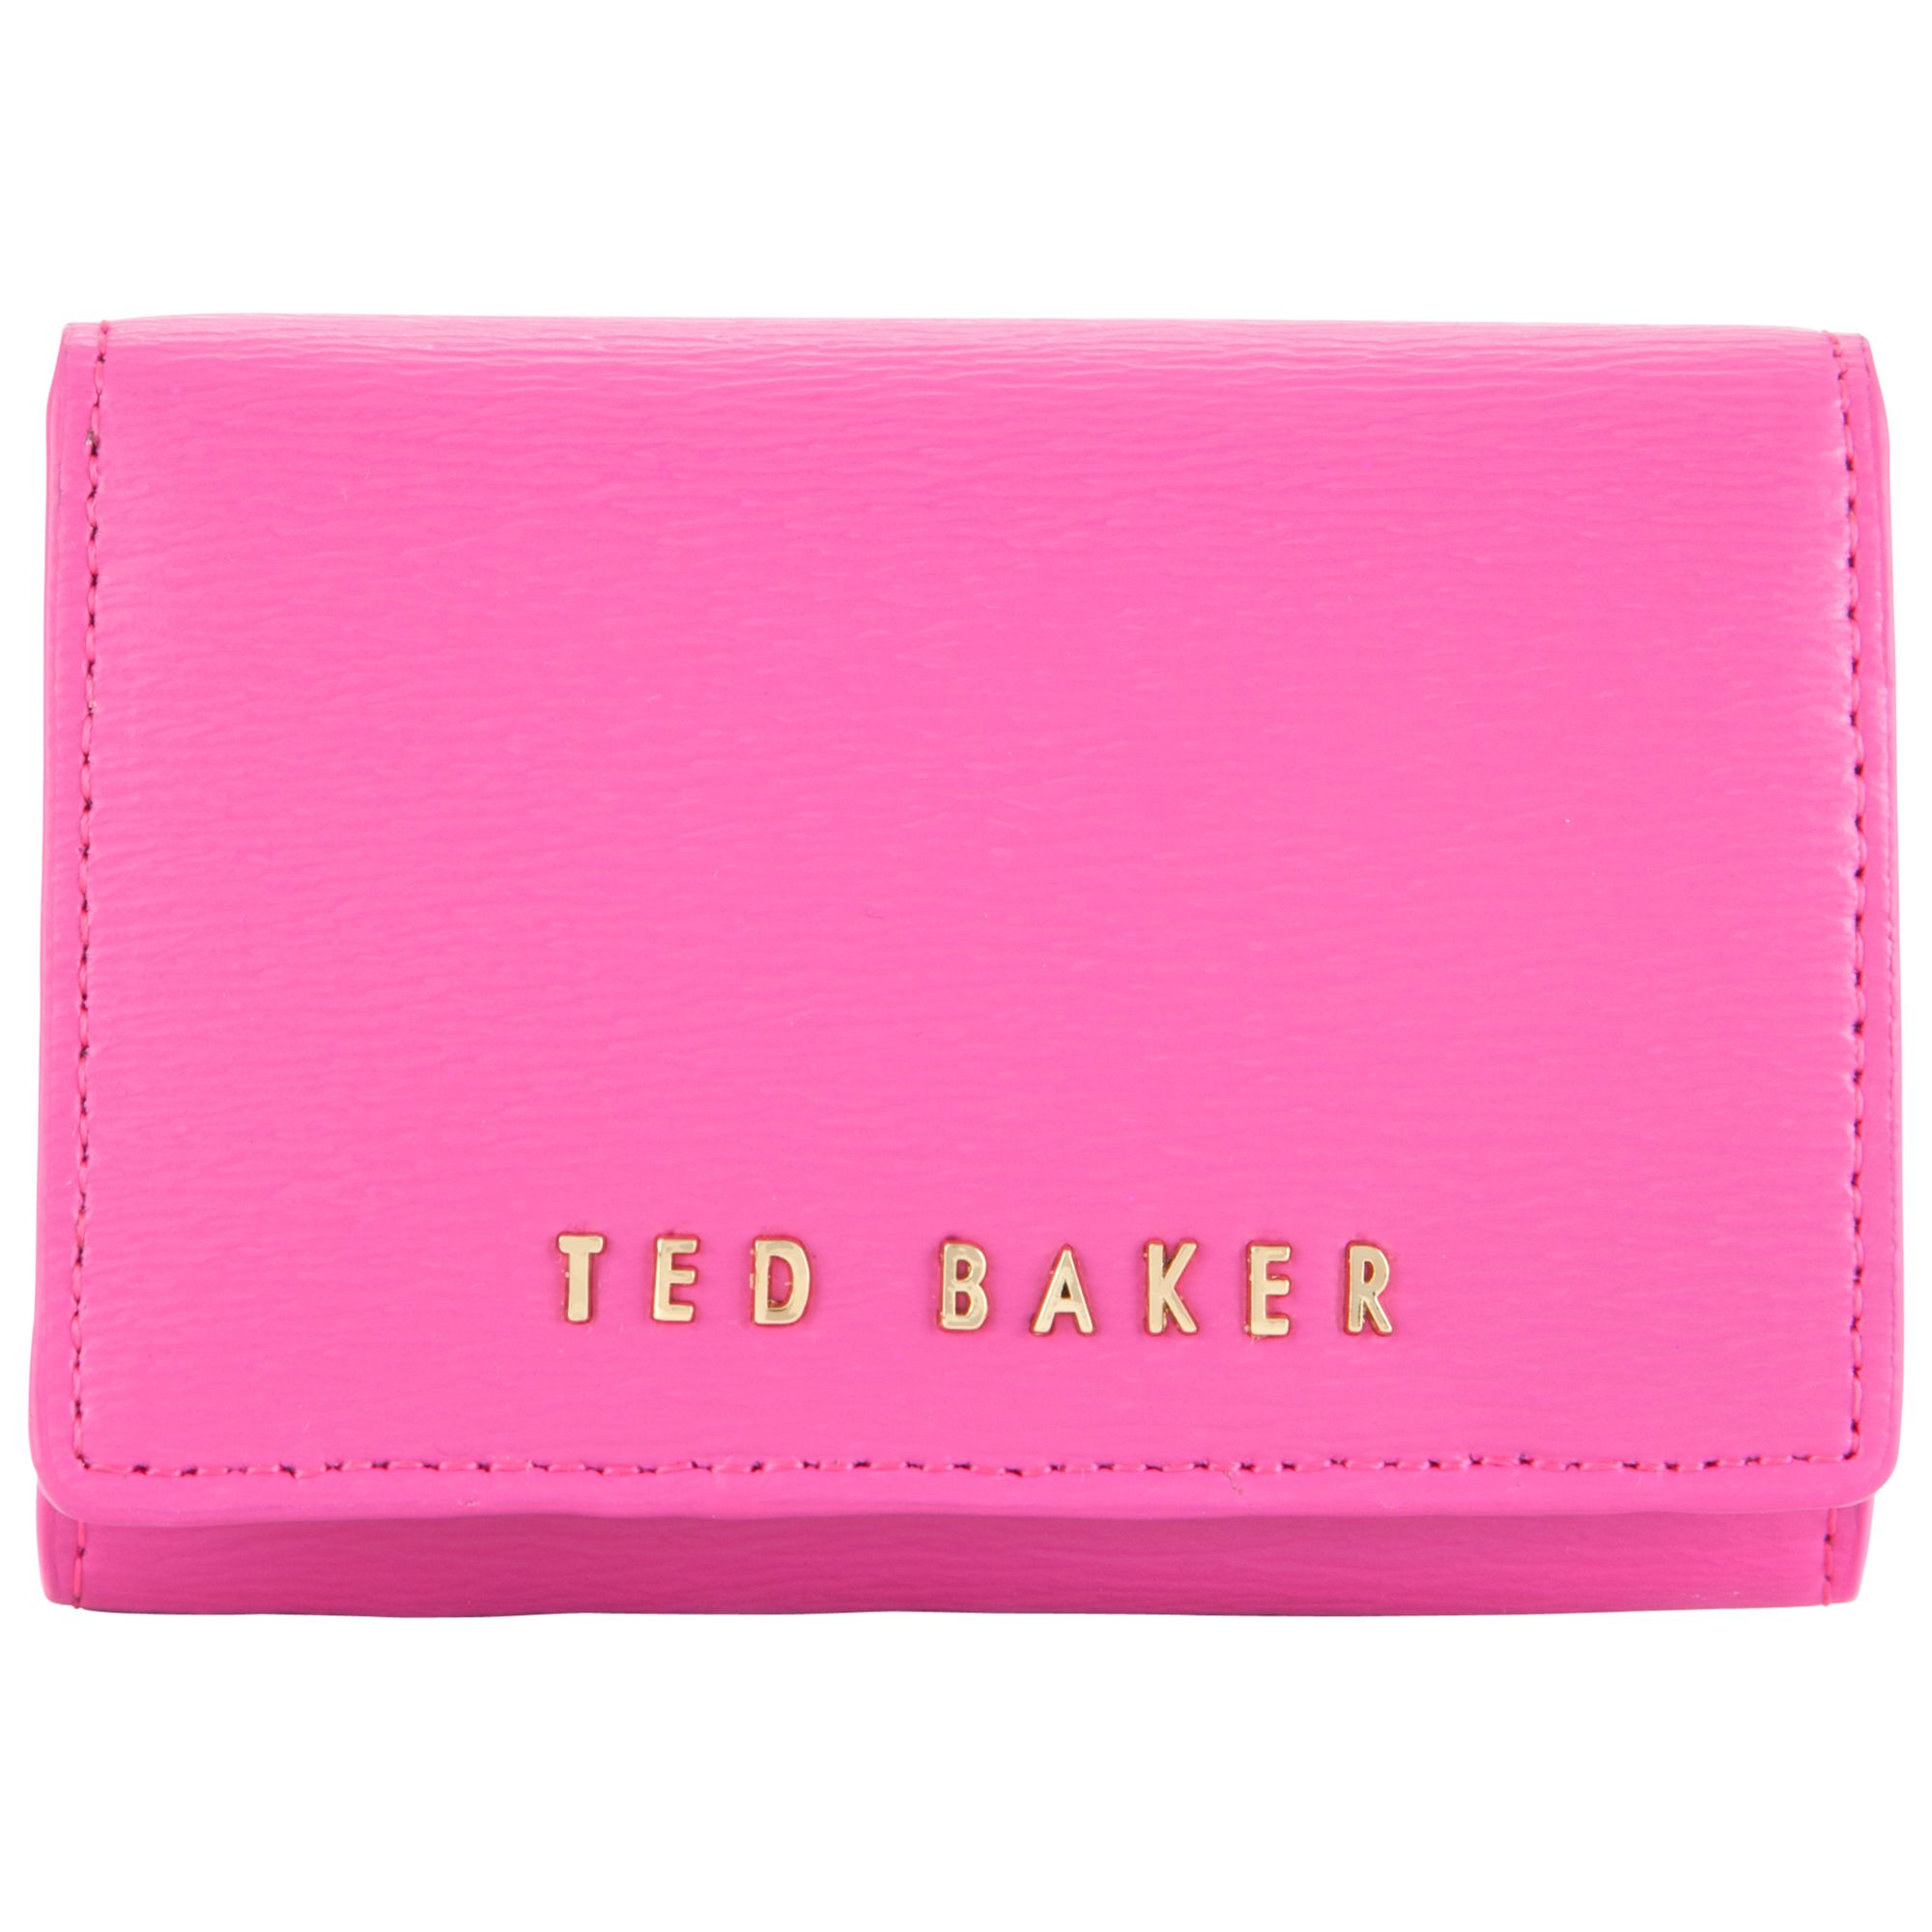 Ted Baker Carley Small Crosshatch Leather Purse